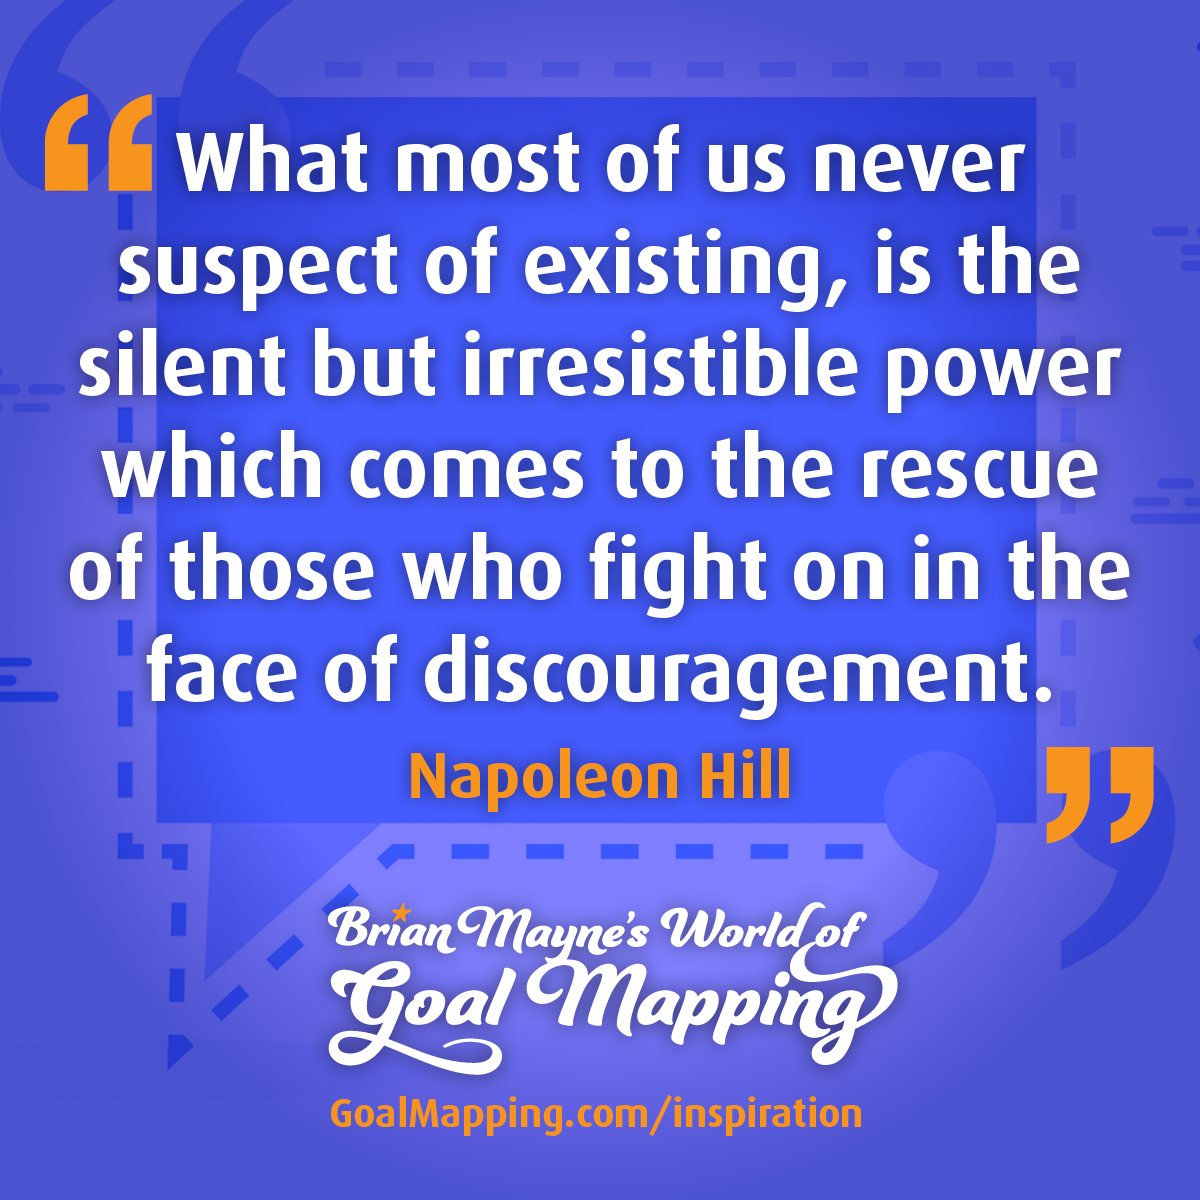 "What most of us never suspect of existing, is the silent but irresistible power which comes to the rescue of those who fight on in the face of discouragement." Napoleon Hill